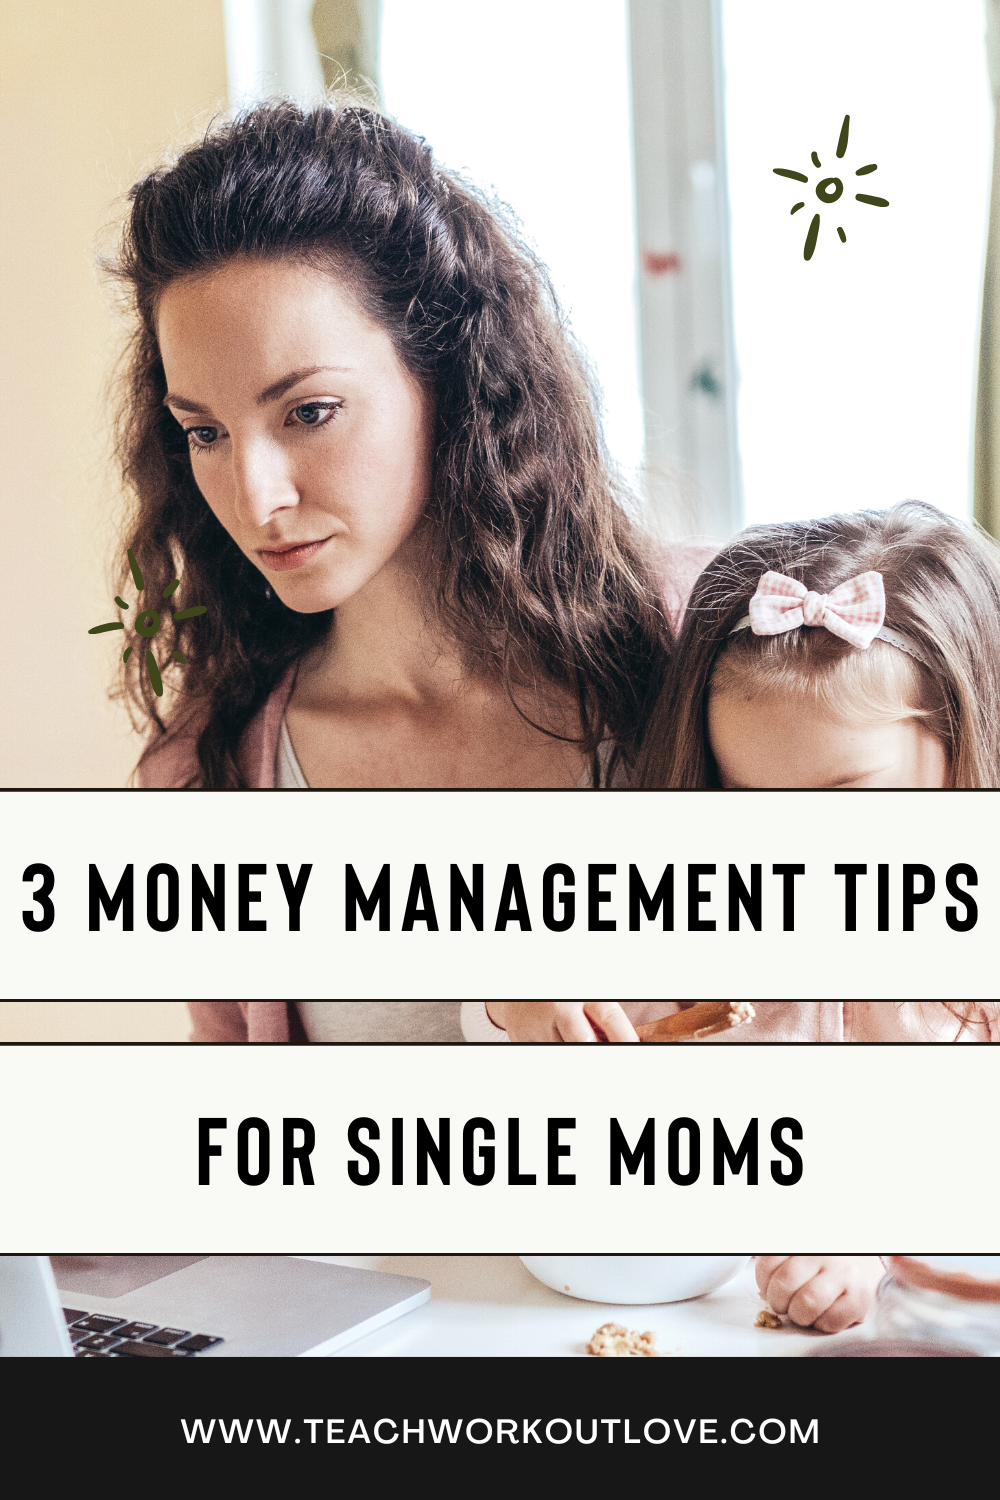 if you follow the next few pieces of money management tips, you'll be able to support your family as a single parent without worrying about your finances.